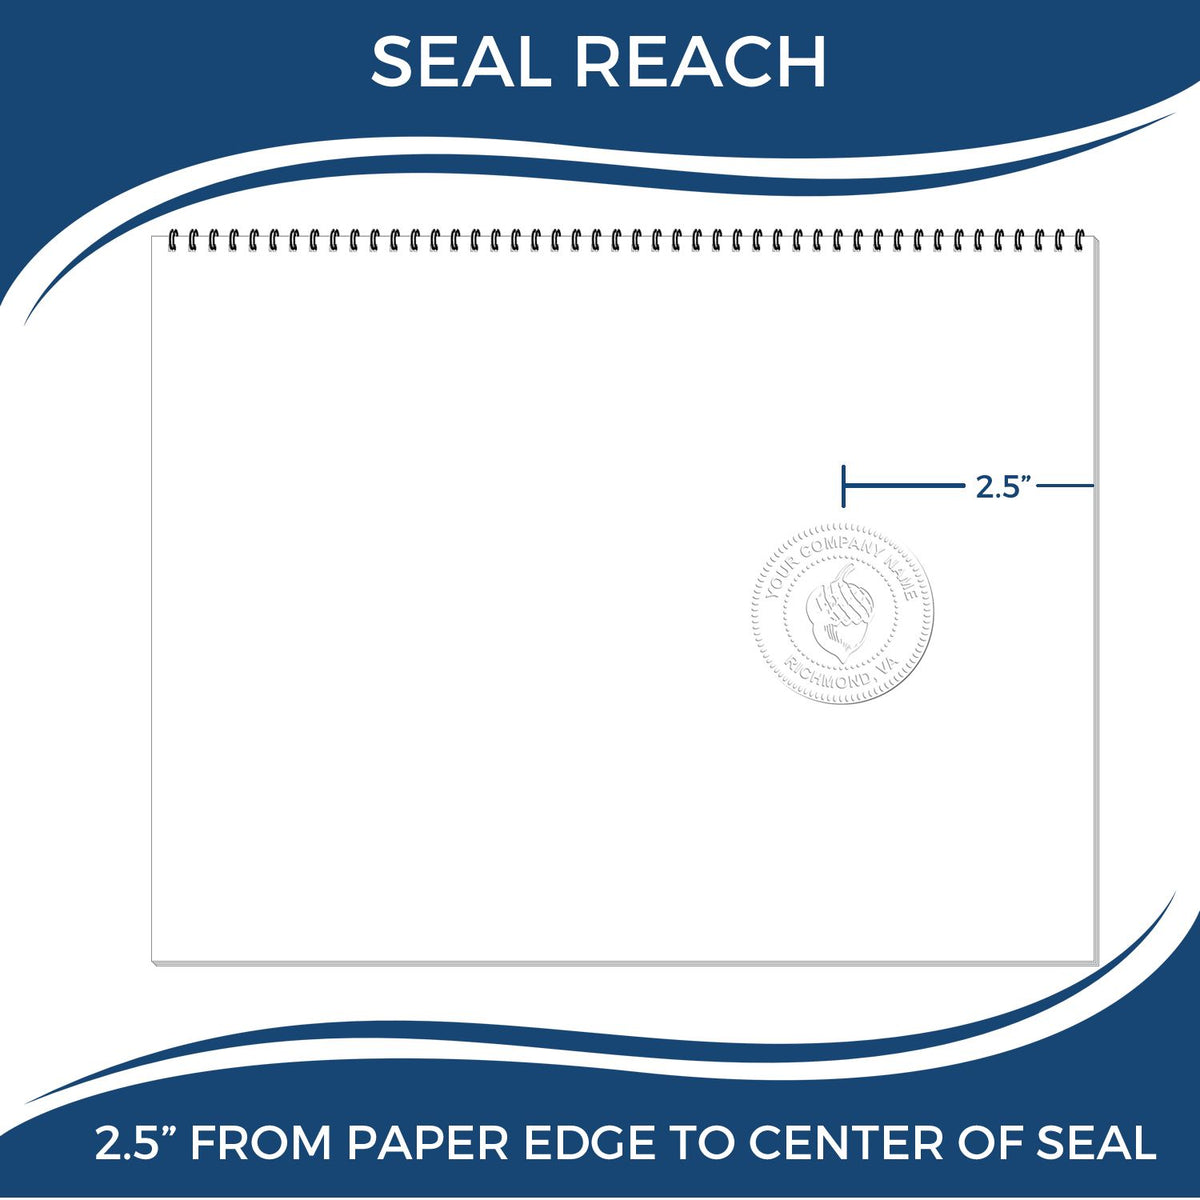 An infographic showing the seal reach which is represented by a ruler and a miniature seal image of the Heavy Duty Cast Iron North Carolina Geologist Seal Embosser